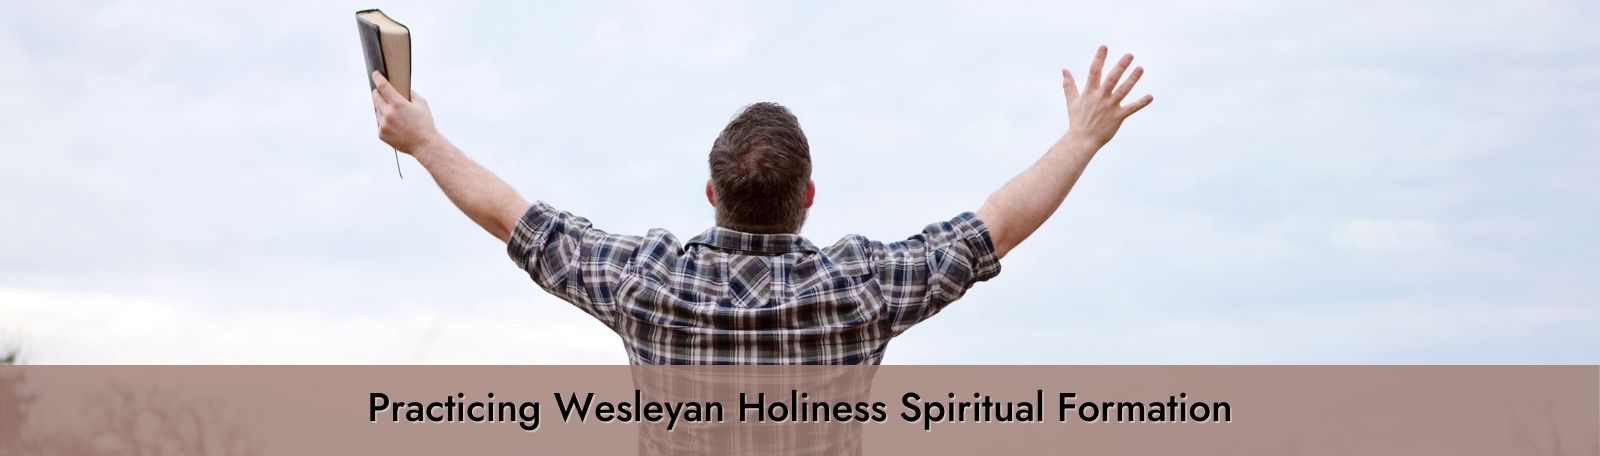 Featured image for “Practicing Wesleyan Holiness Spiritual Formation”